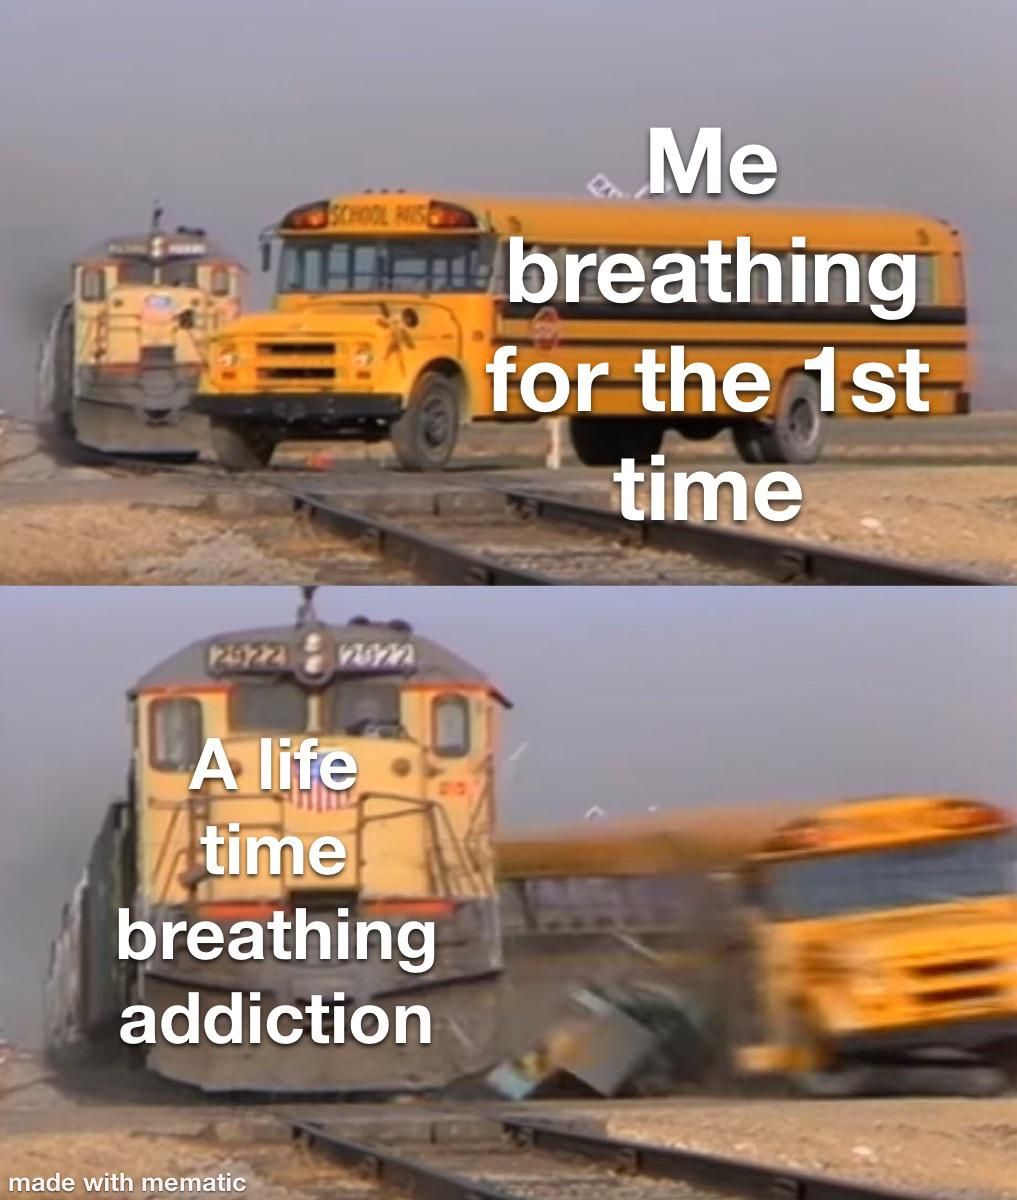 Breathing is such an addiction